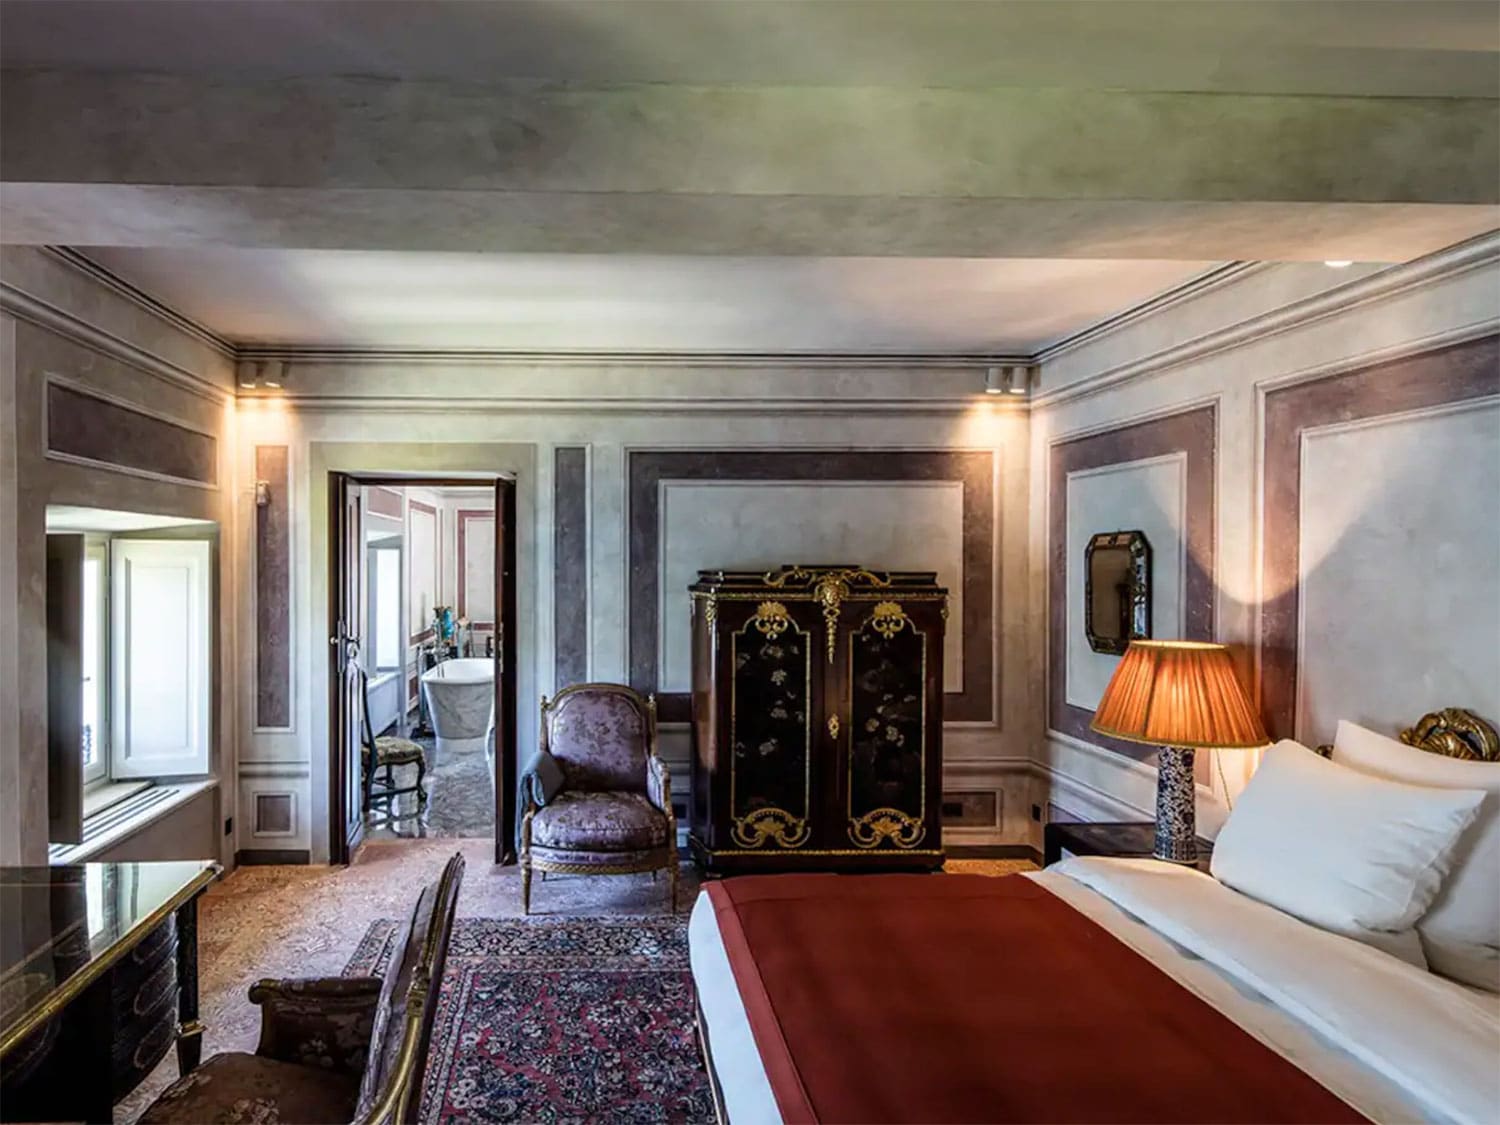 An interior bedroom of Villa Balbiano, the House of Gucci